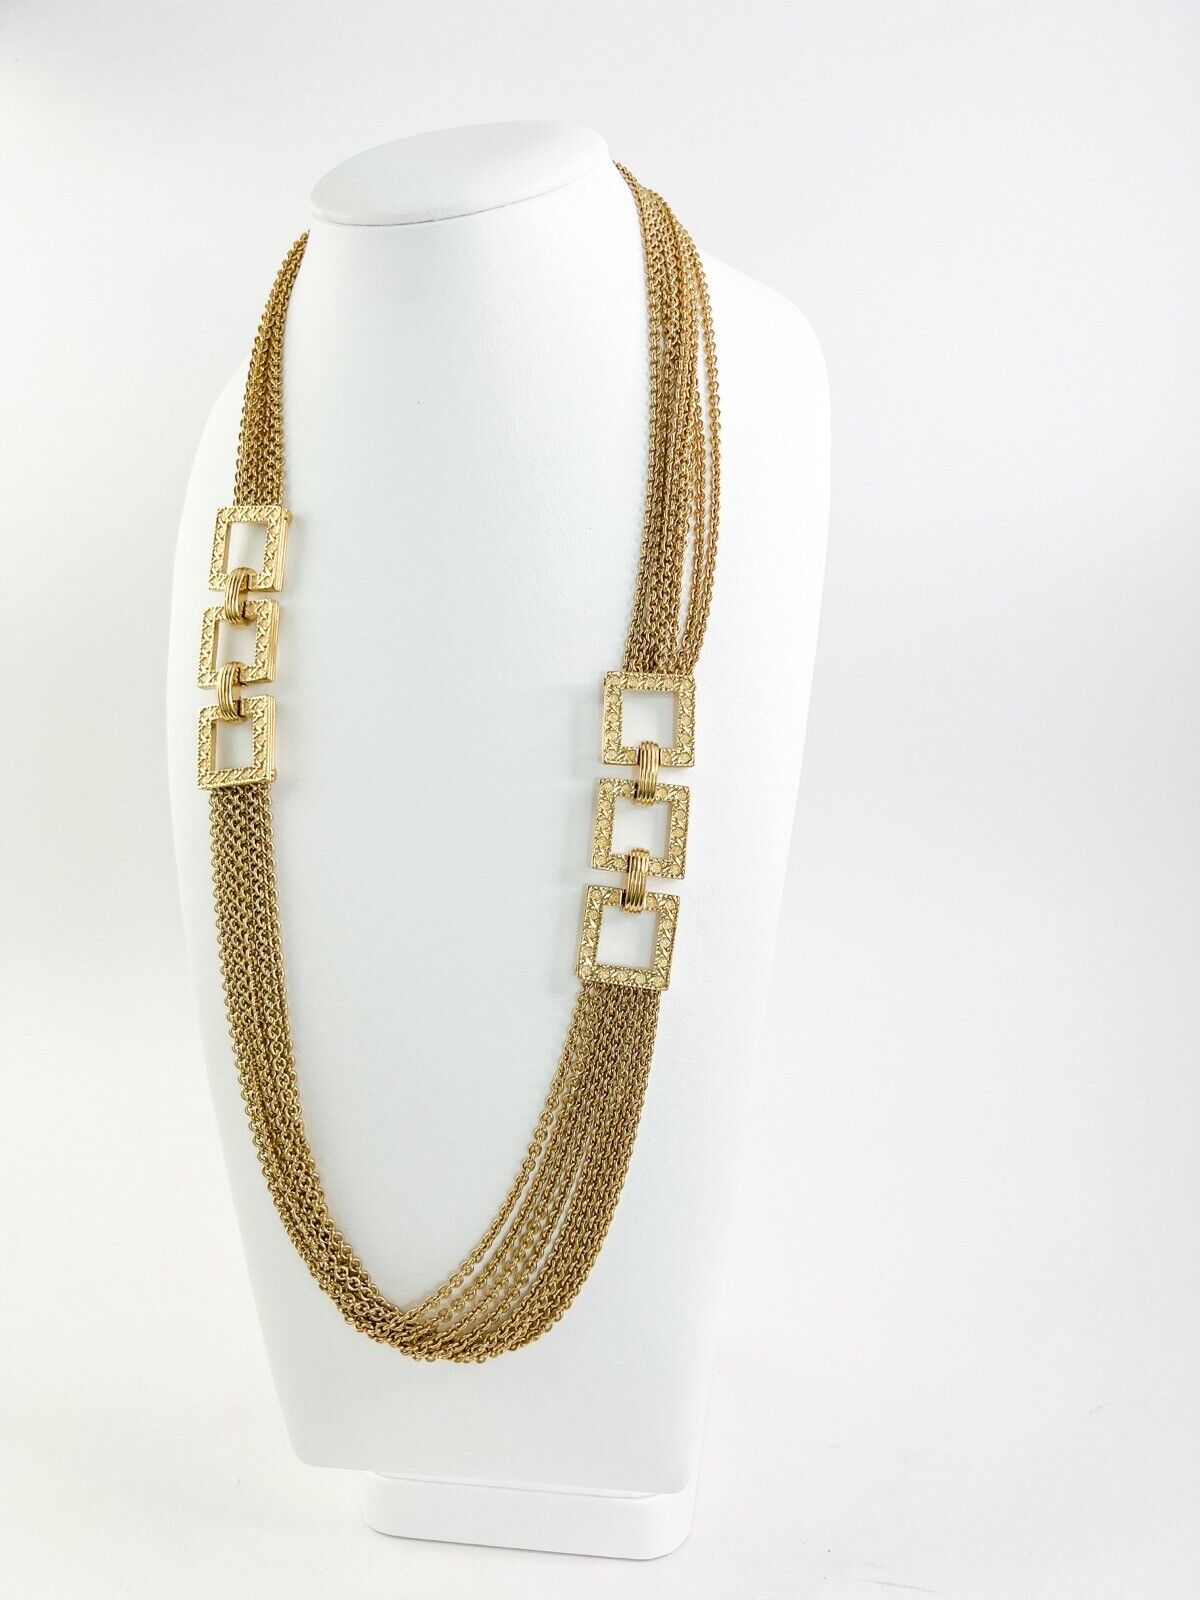 【SOLD OUT】Christian Dior Vintage Gold Tone Multi-strand Necklace Diorama